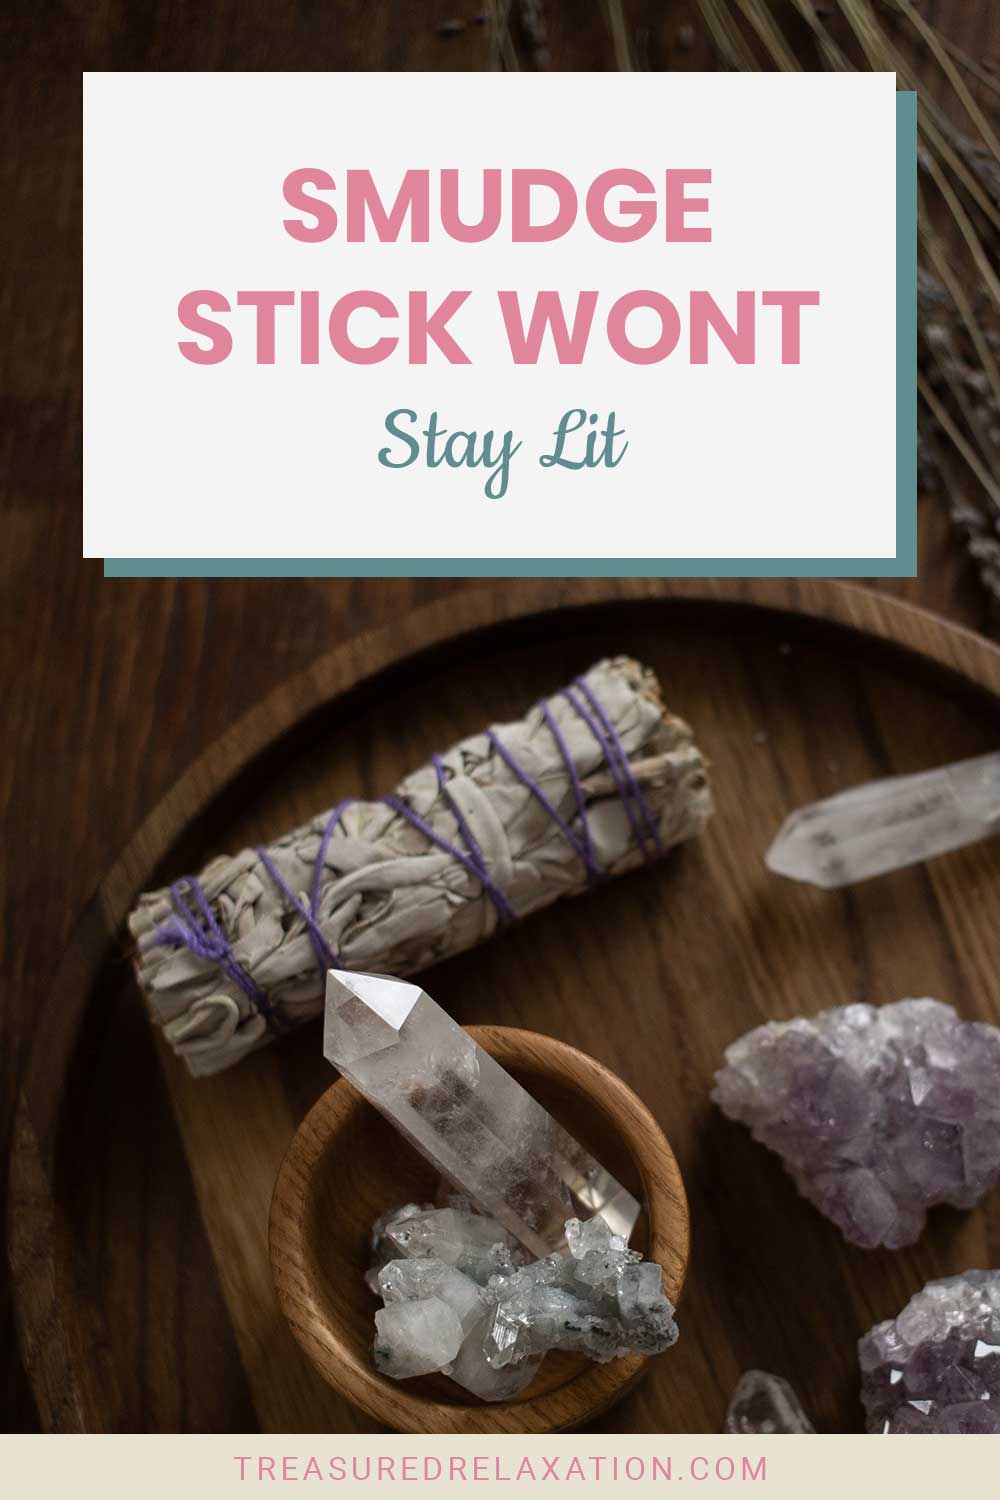 Smudge sticks on a wooden table with some crystals - Smudge Stick Wont Stay Lit